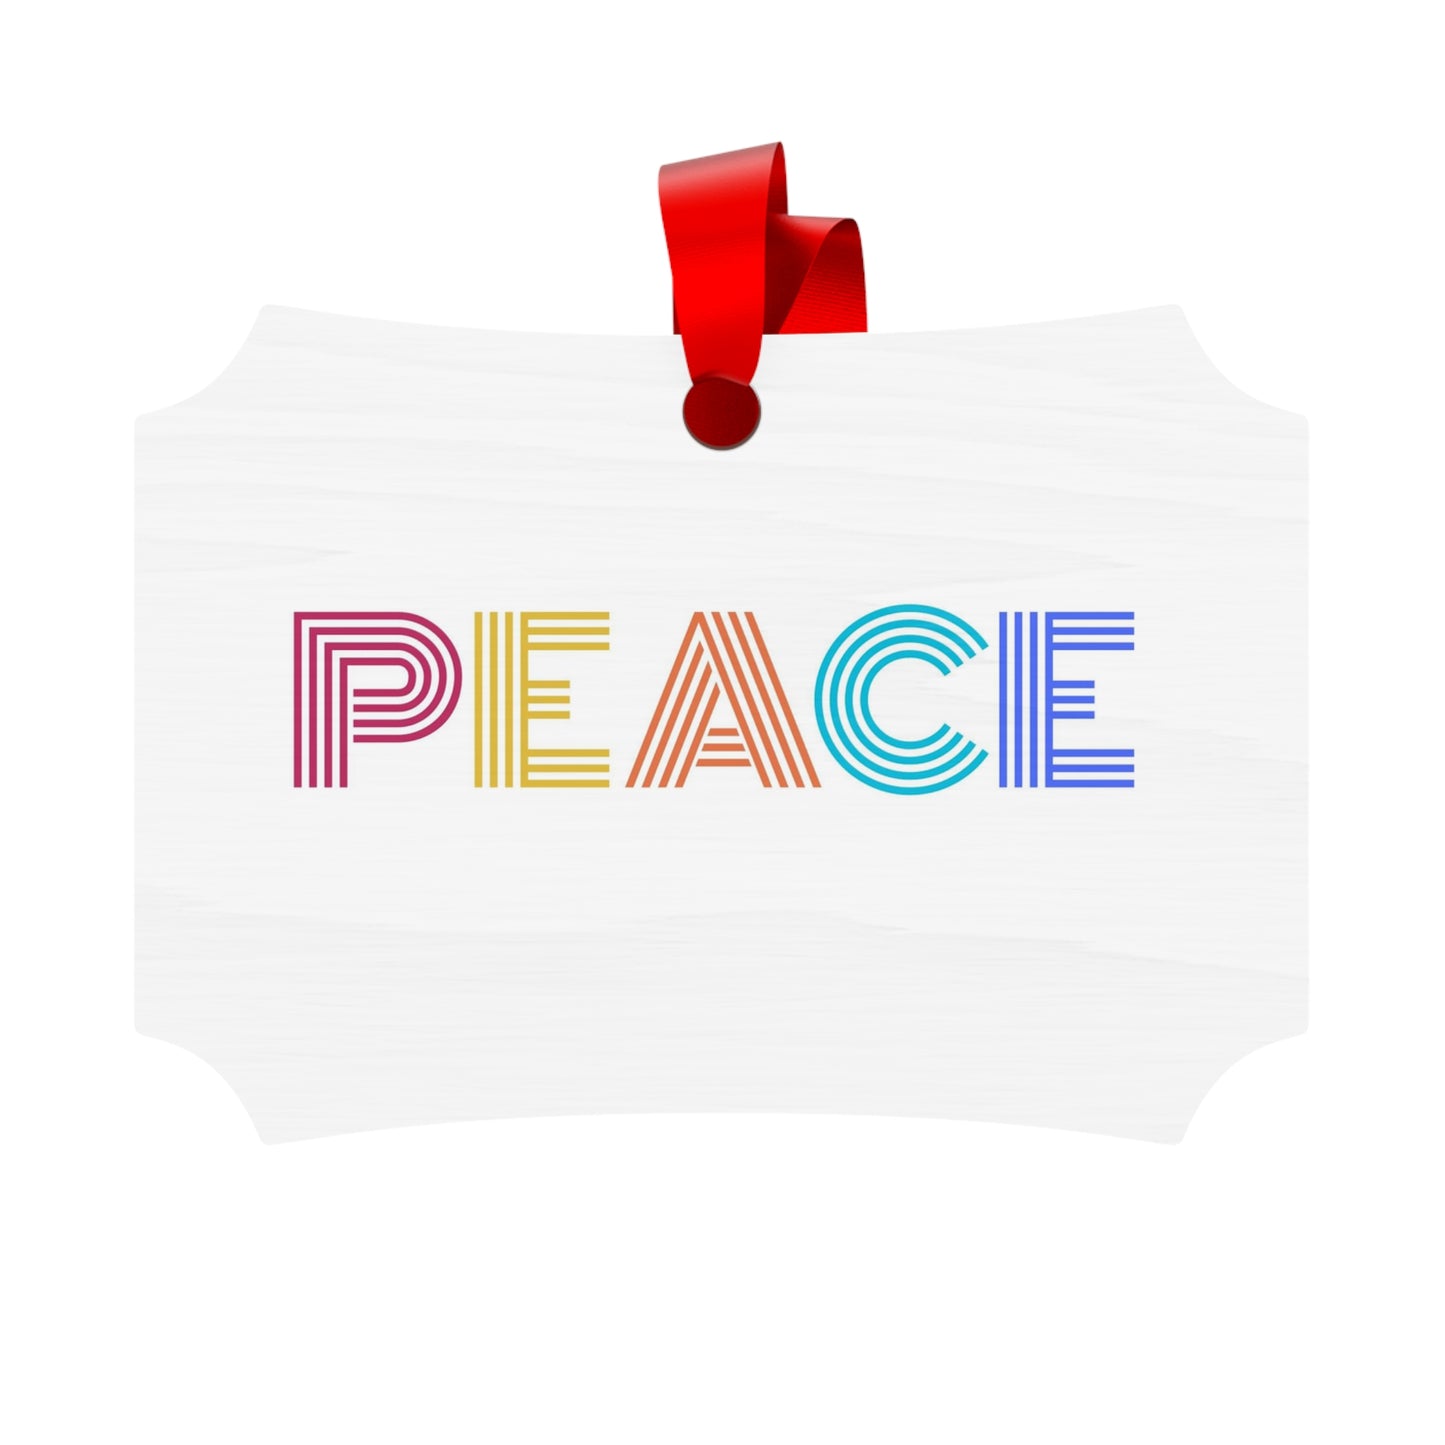 Plywood Ornament, PEACE